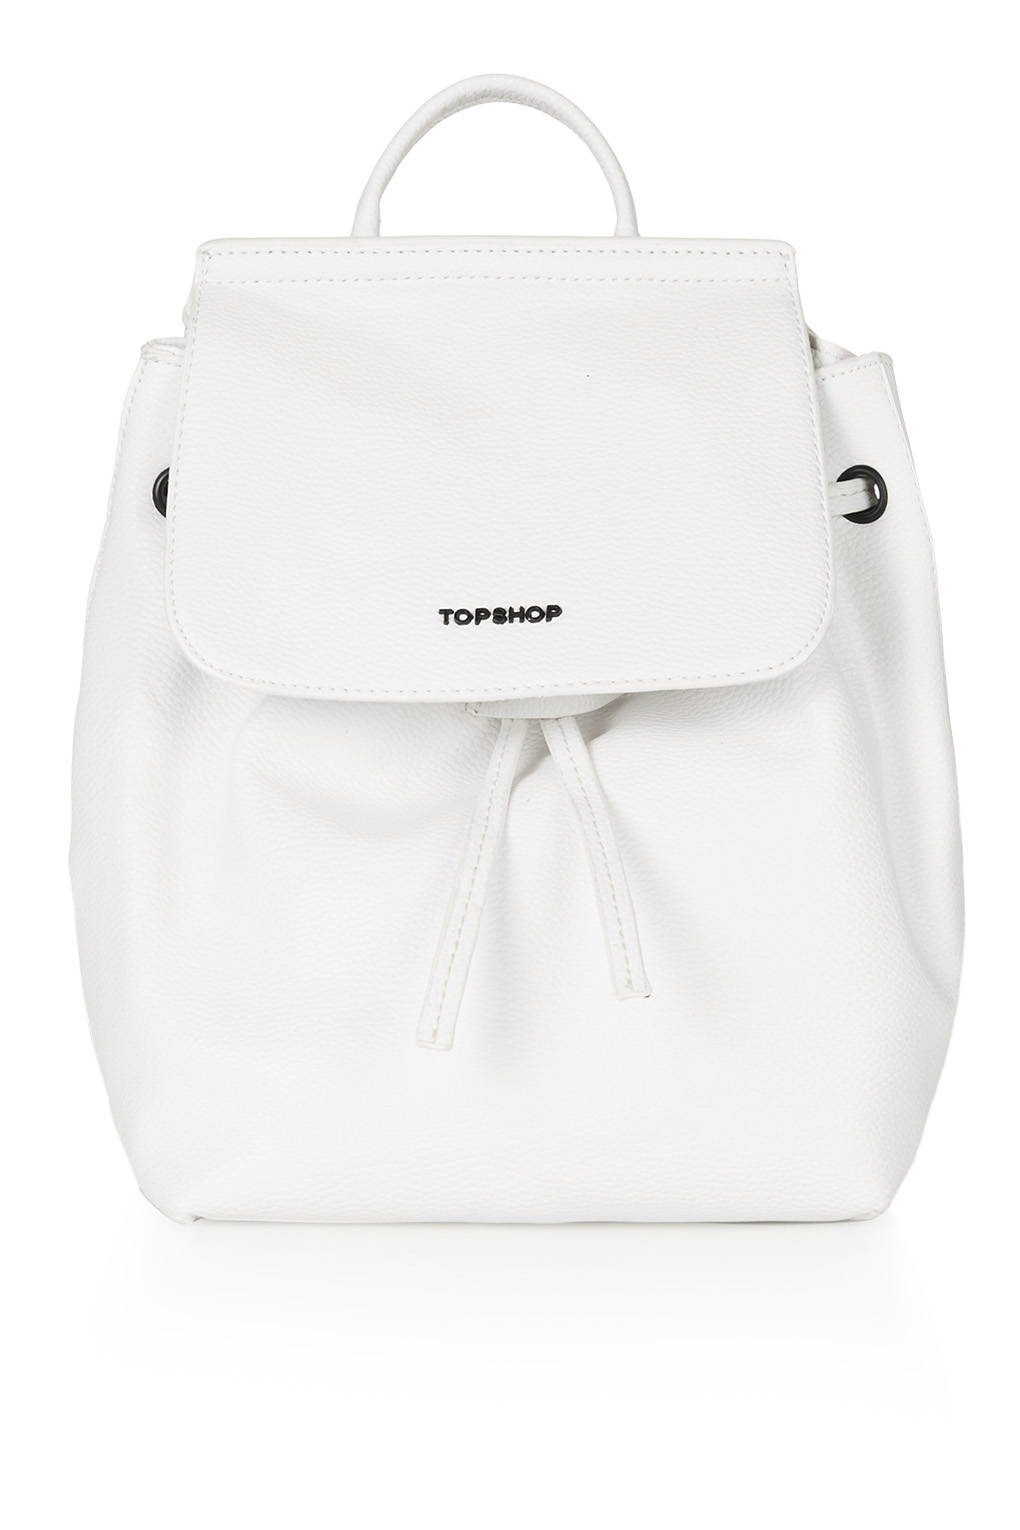 Lyst - Topshop Mini Textured Backpack in White